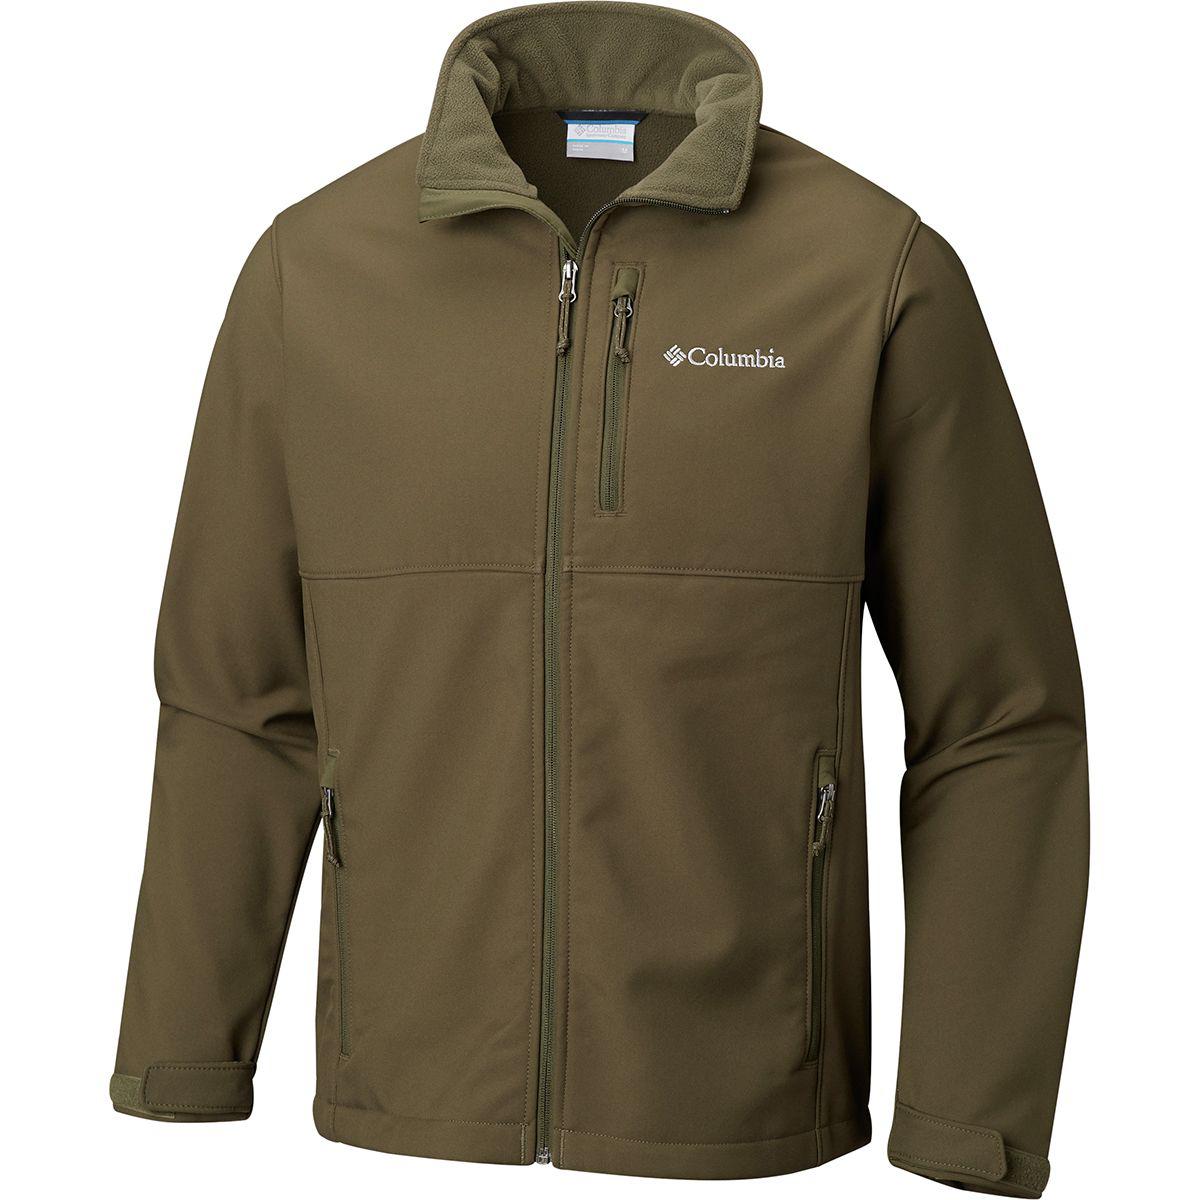 Columbia Synthetic Ascender Softshell Jacket in Green for Men - Lyst